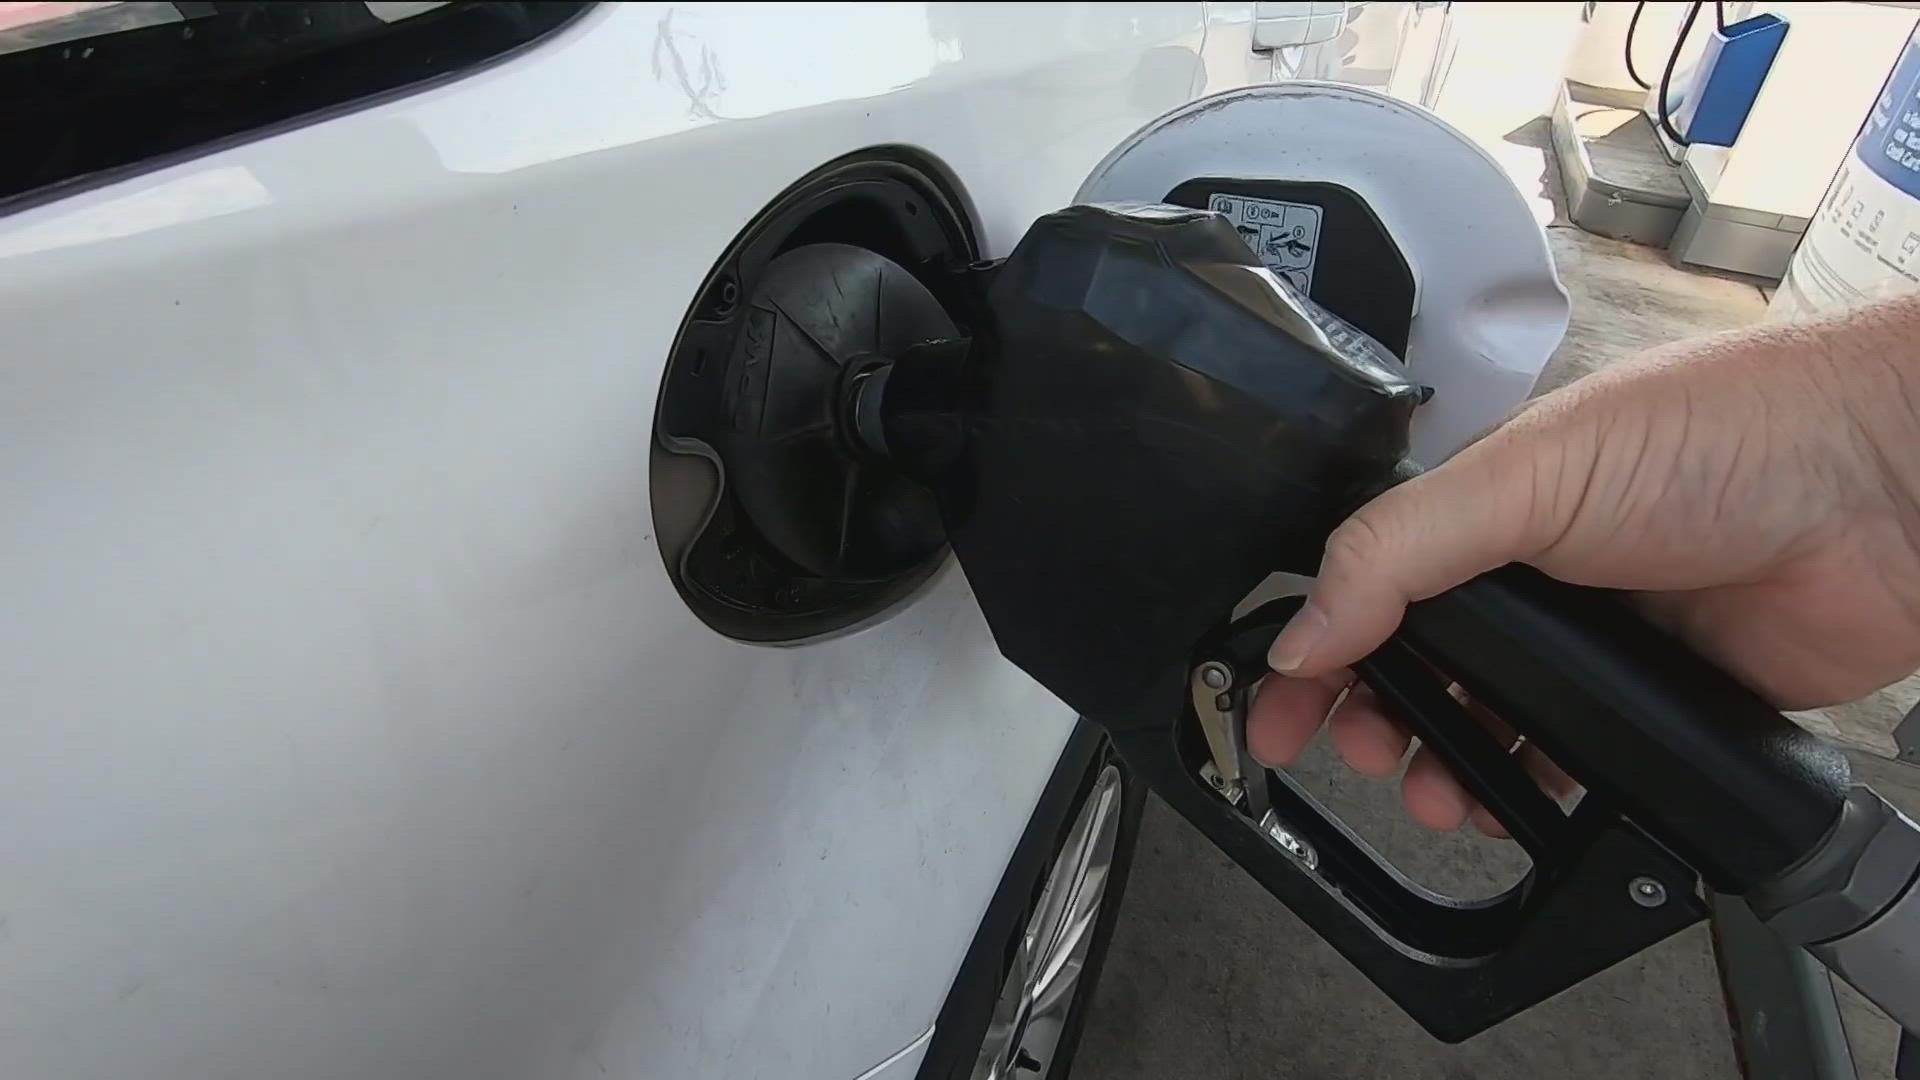 As of Monday, people in Boise are paying an average of $3.76 a gallon for regular gas, which is 19 cents more expensive than one year ago.